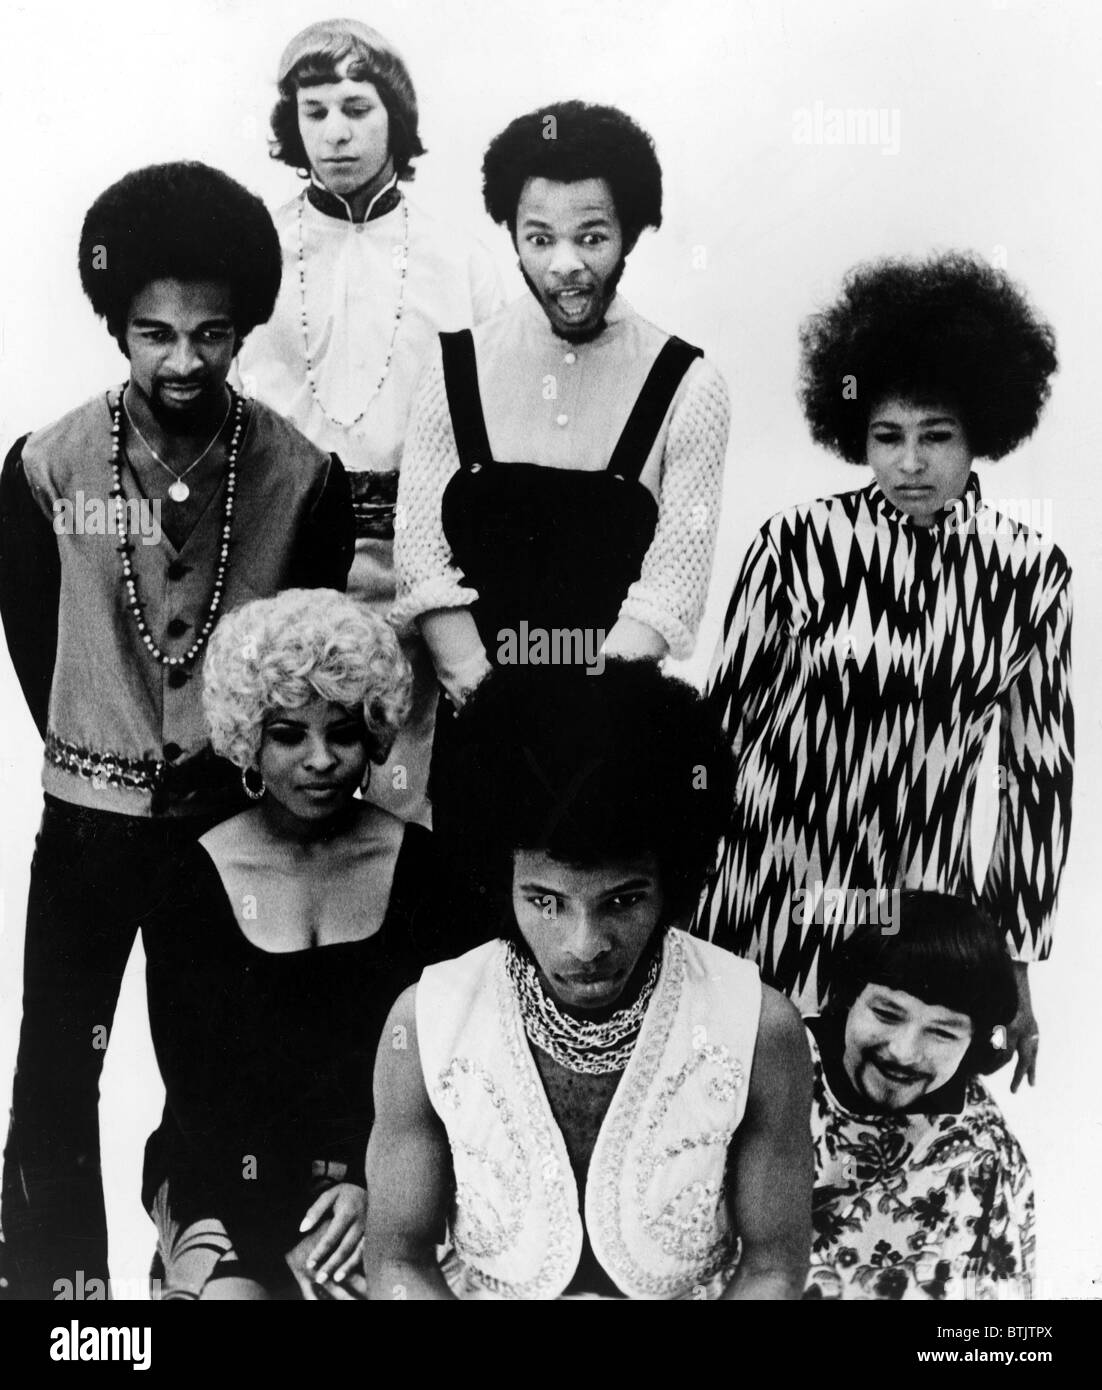 SLY AND THE FAMILY STONE, c. 1970. Banque D'Images